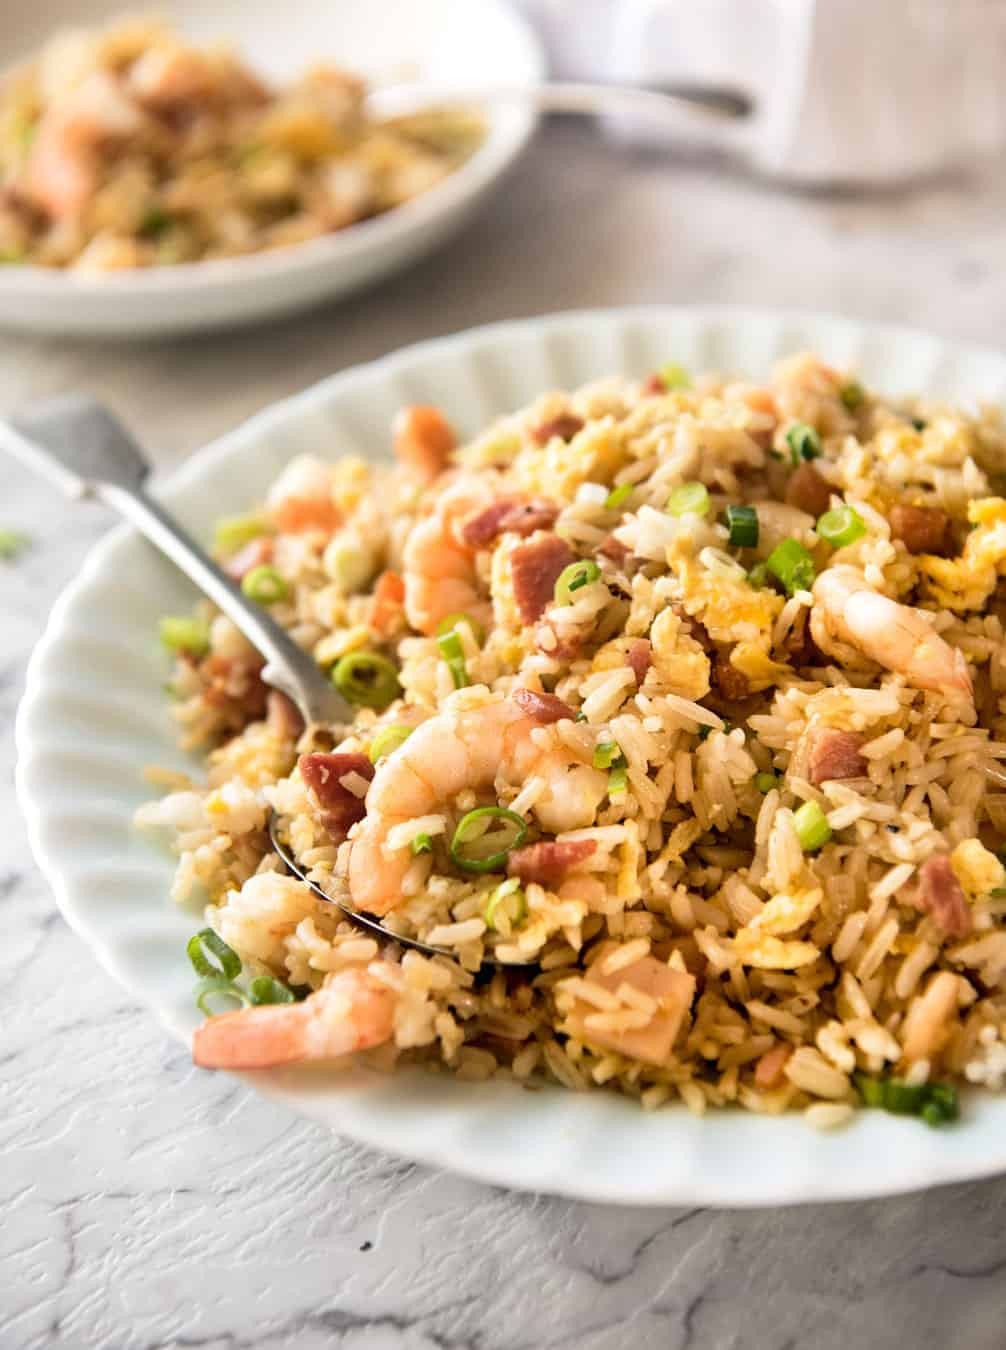 Authentic Chinese Fried Rice Recipe
 authentic chinese pork fried rice recipe